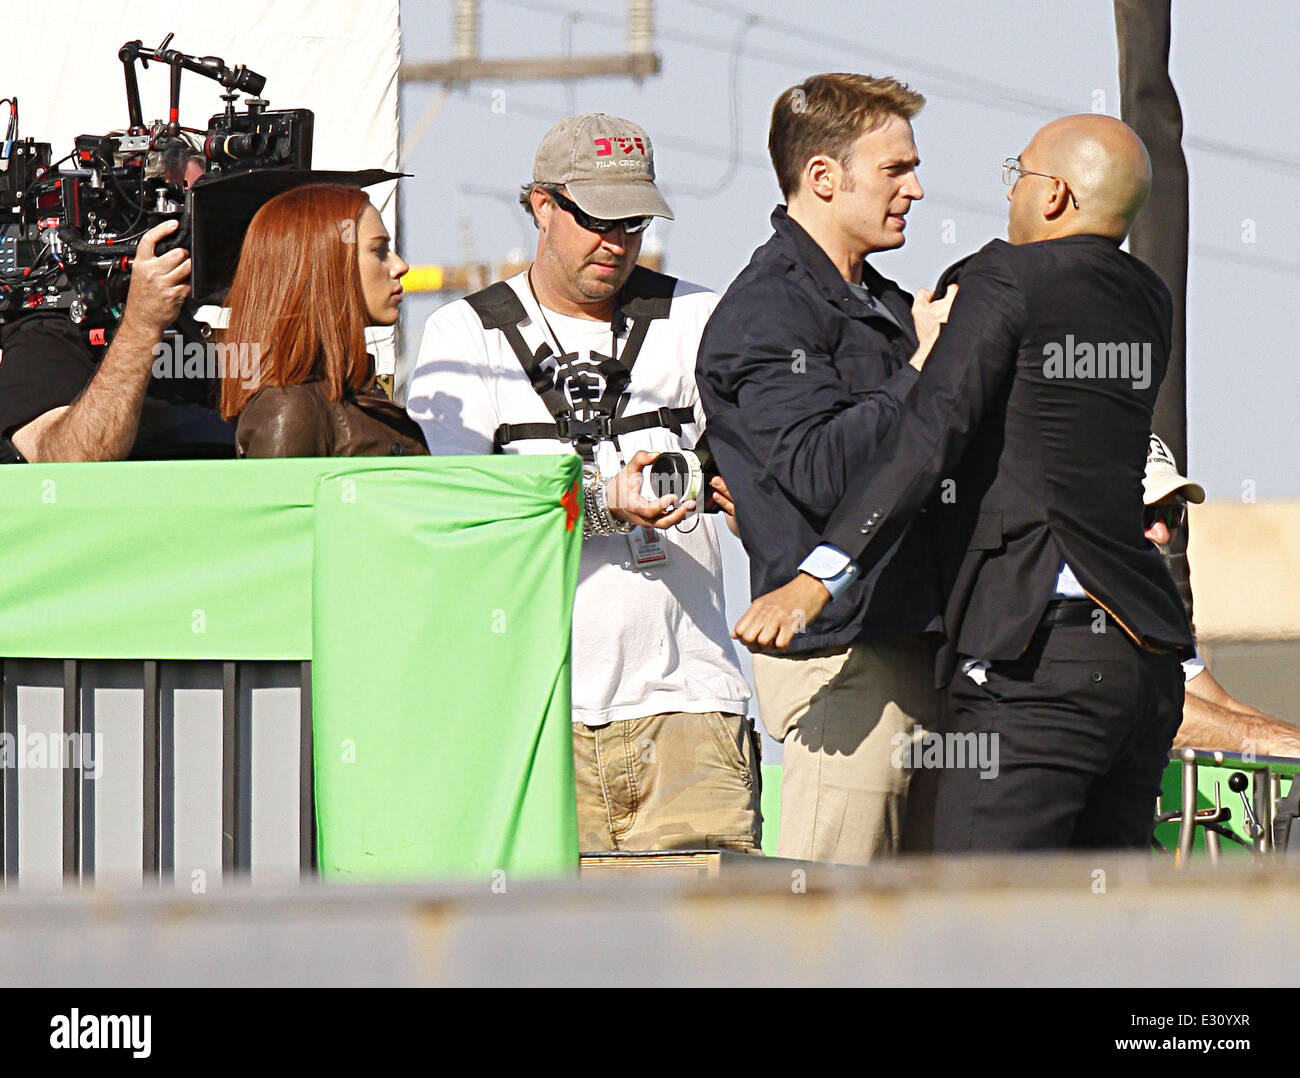 Scarlett Johansson and Chris Evans filming scenes for their new movie 'Captain America: Winter Soldier' on location in Los Angeles  Featuring: Scarlett Johannsson,Chris Evans Where: Los Angeles, California, United States When: 29 Apr 2013 Stock Photo